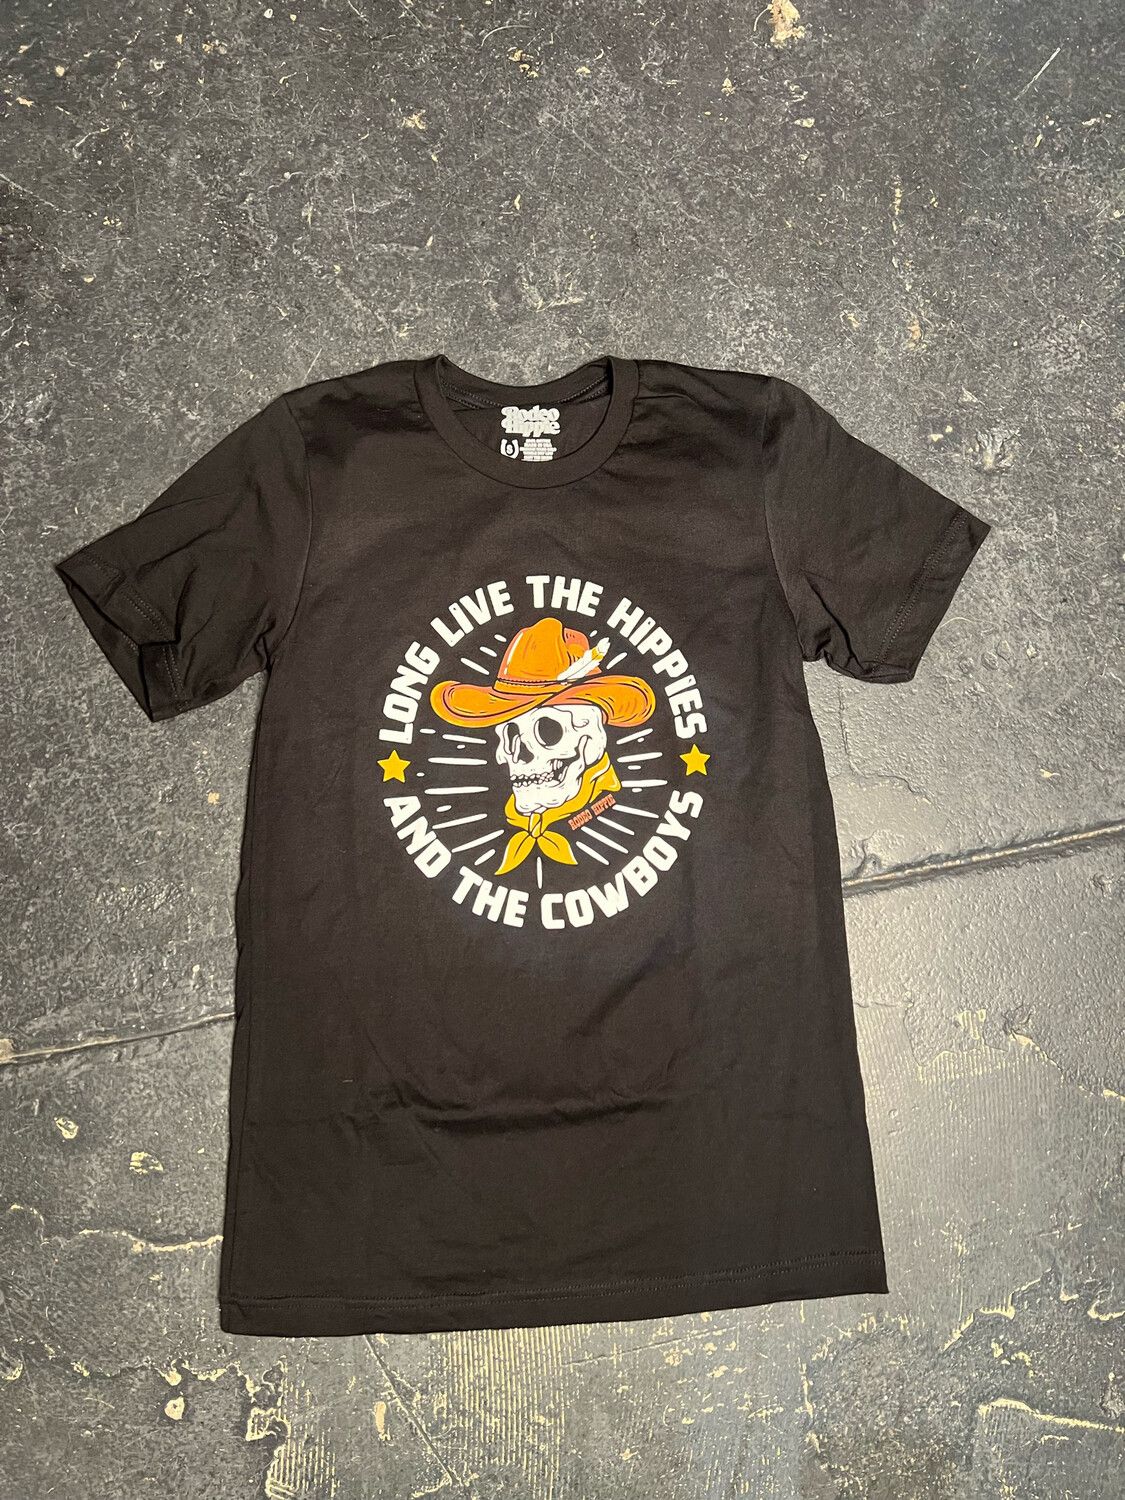 Long Live The Hippies And The Cowboys - BK TEE